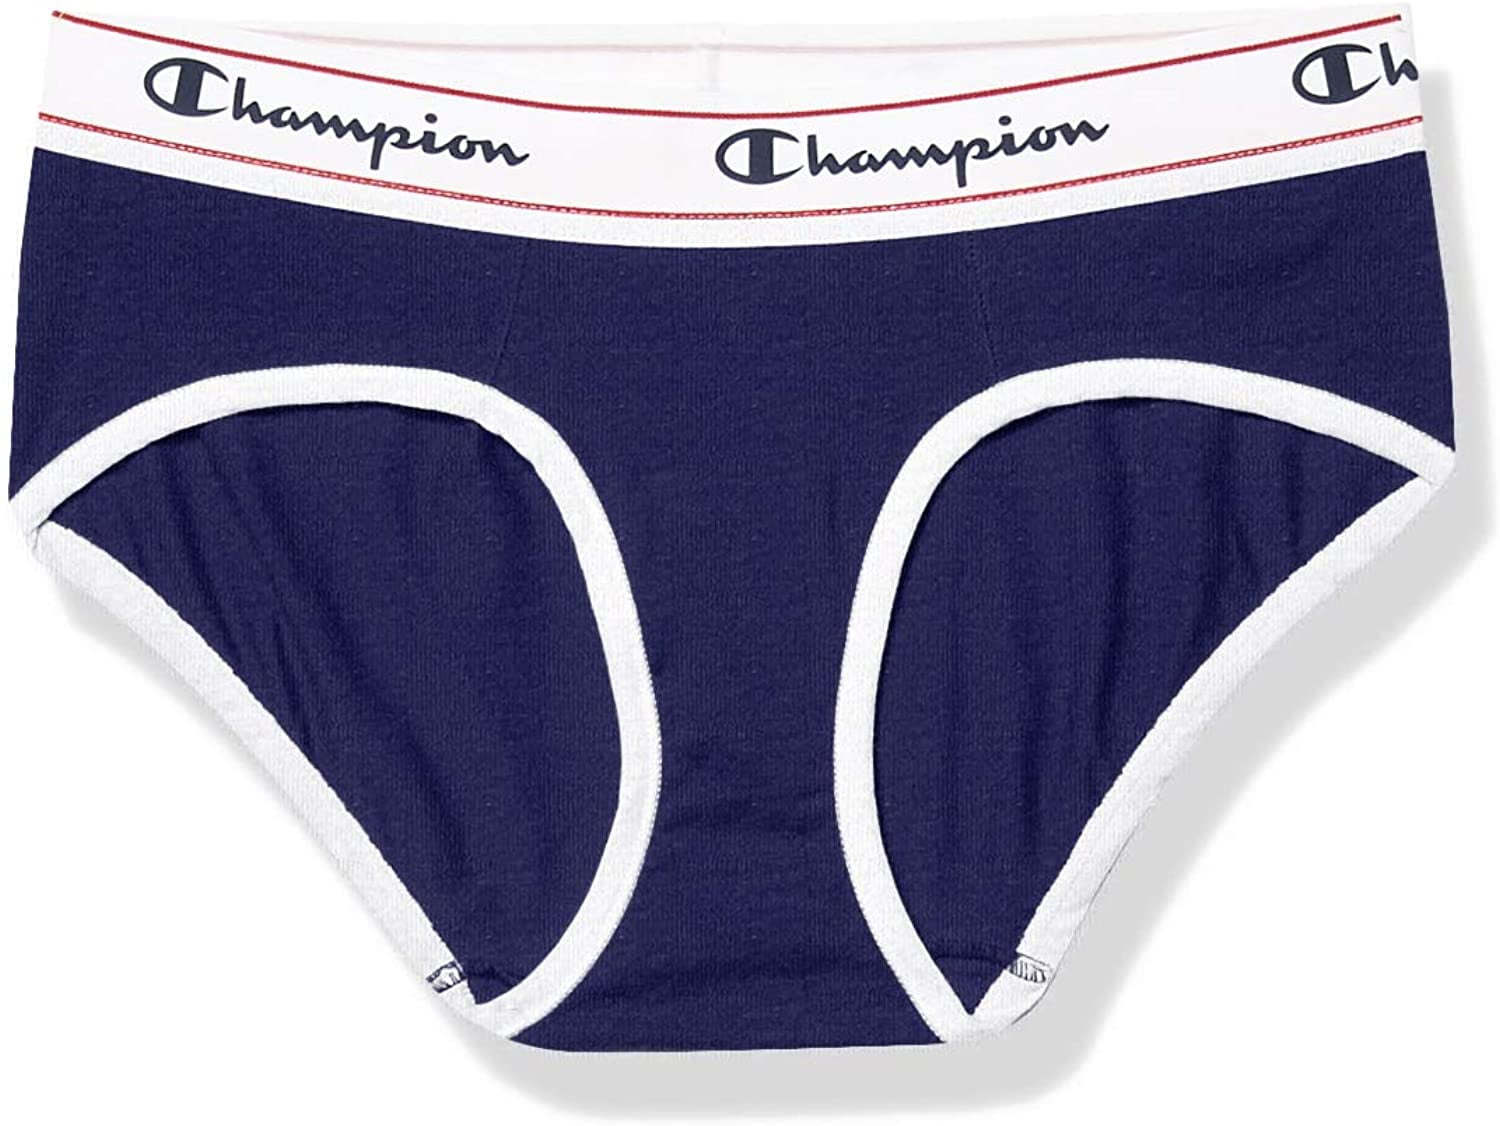 Champion Women's Heritage Hipster Panty